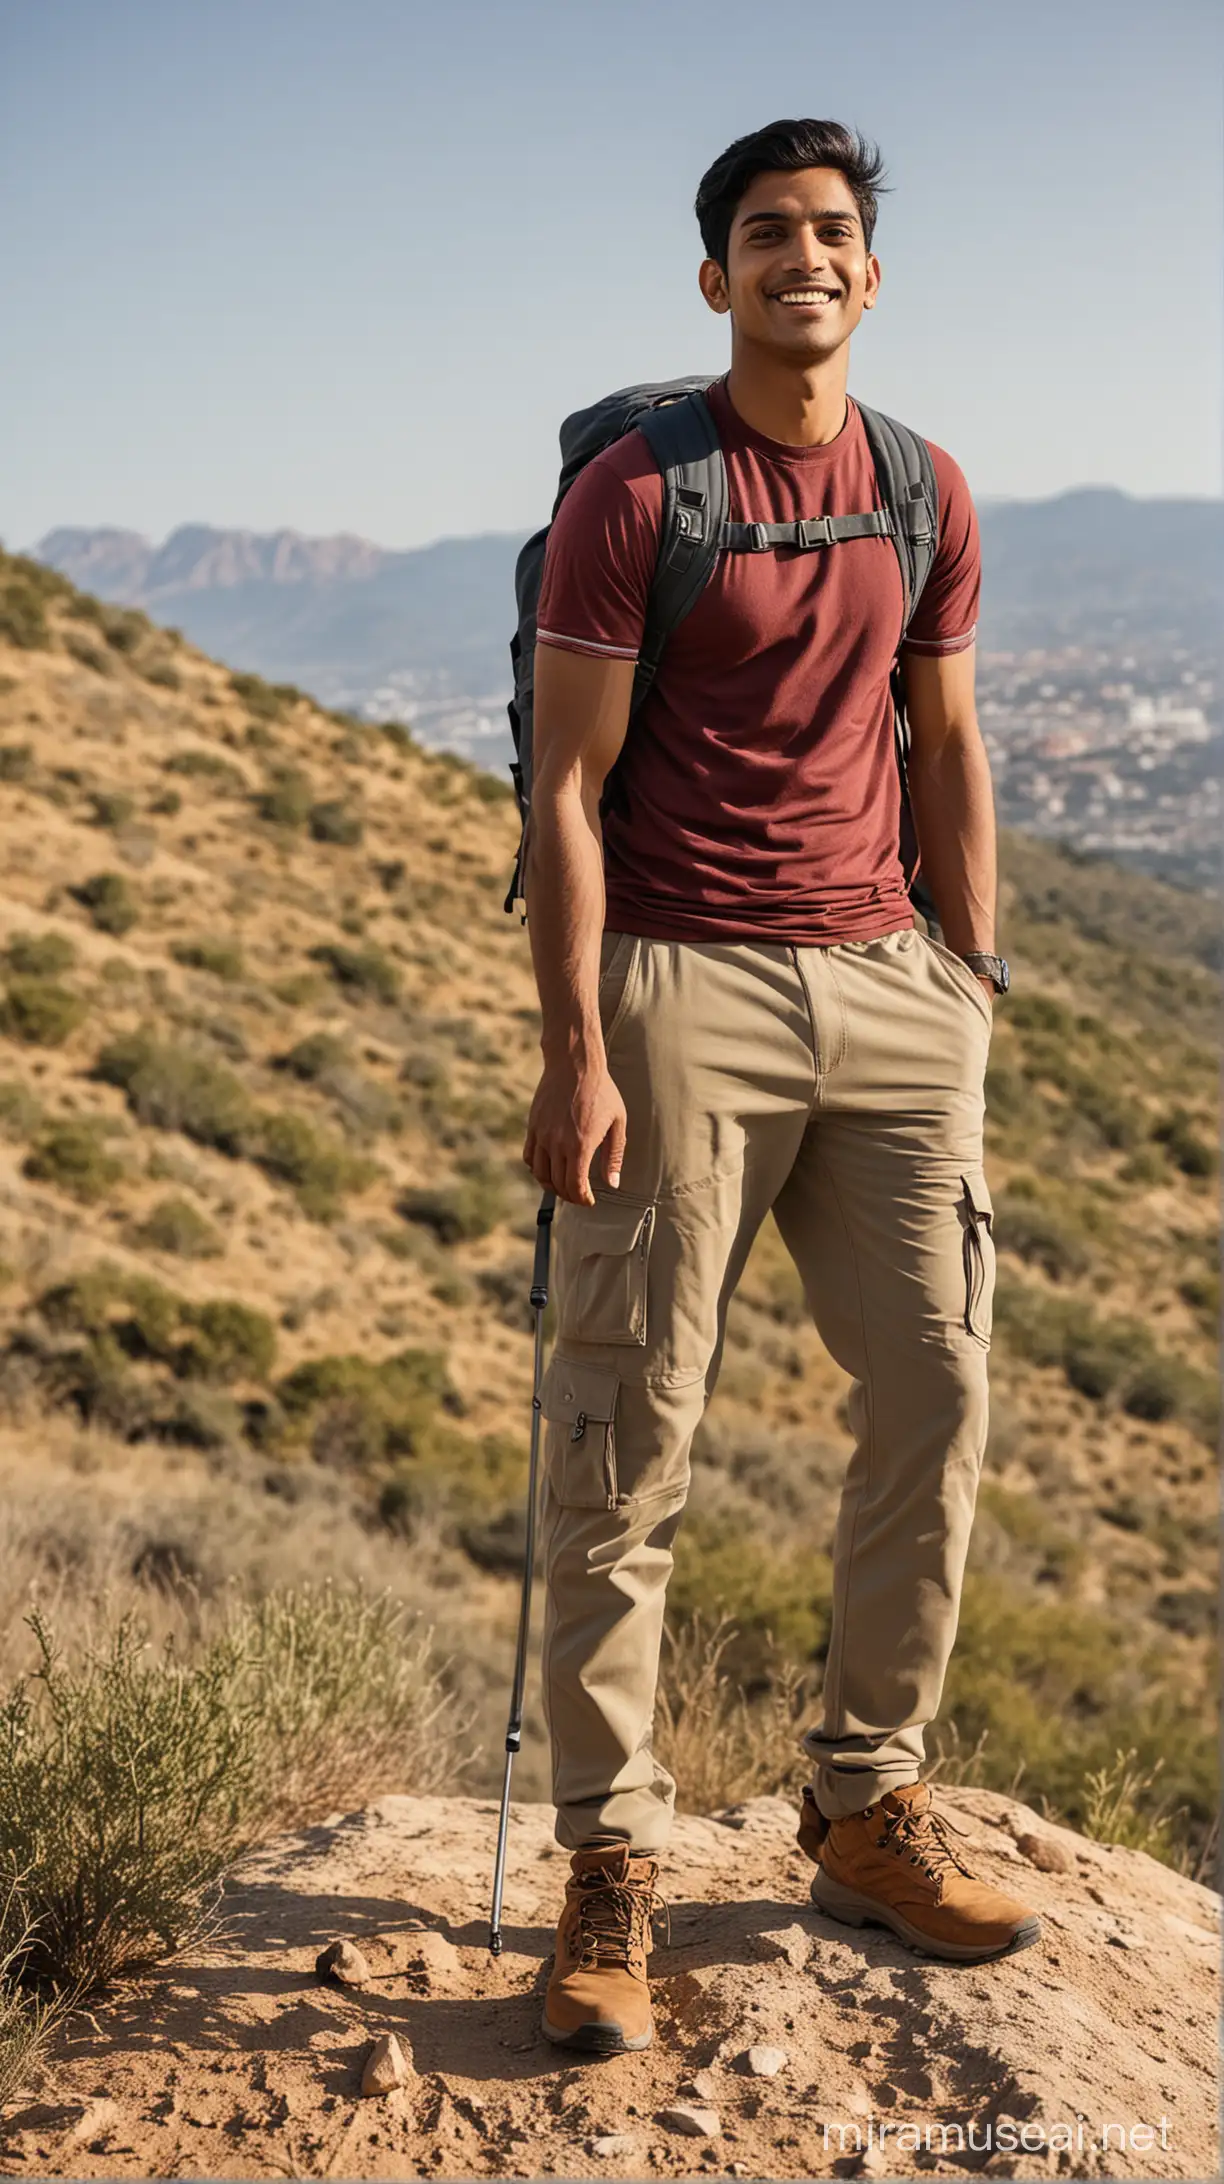 Young Indian Man in Hiking Outfit Standing on Hilltop